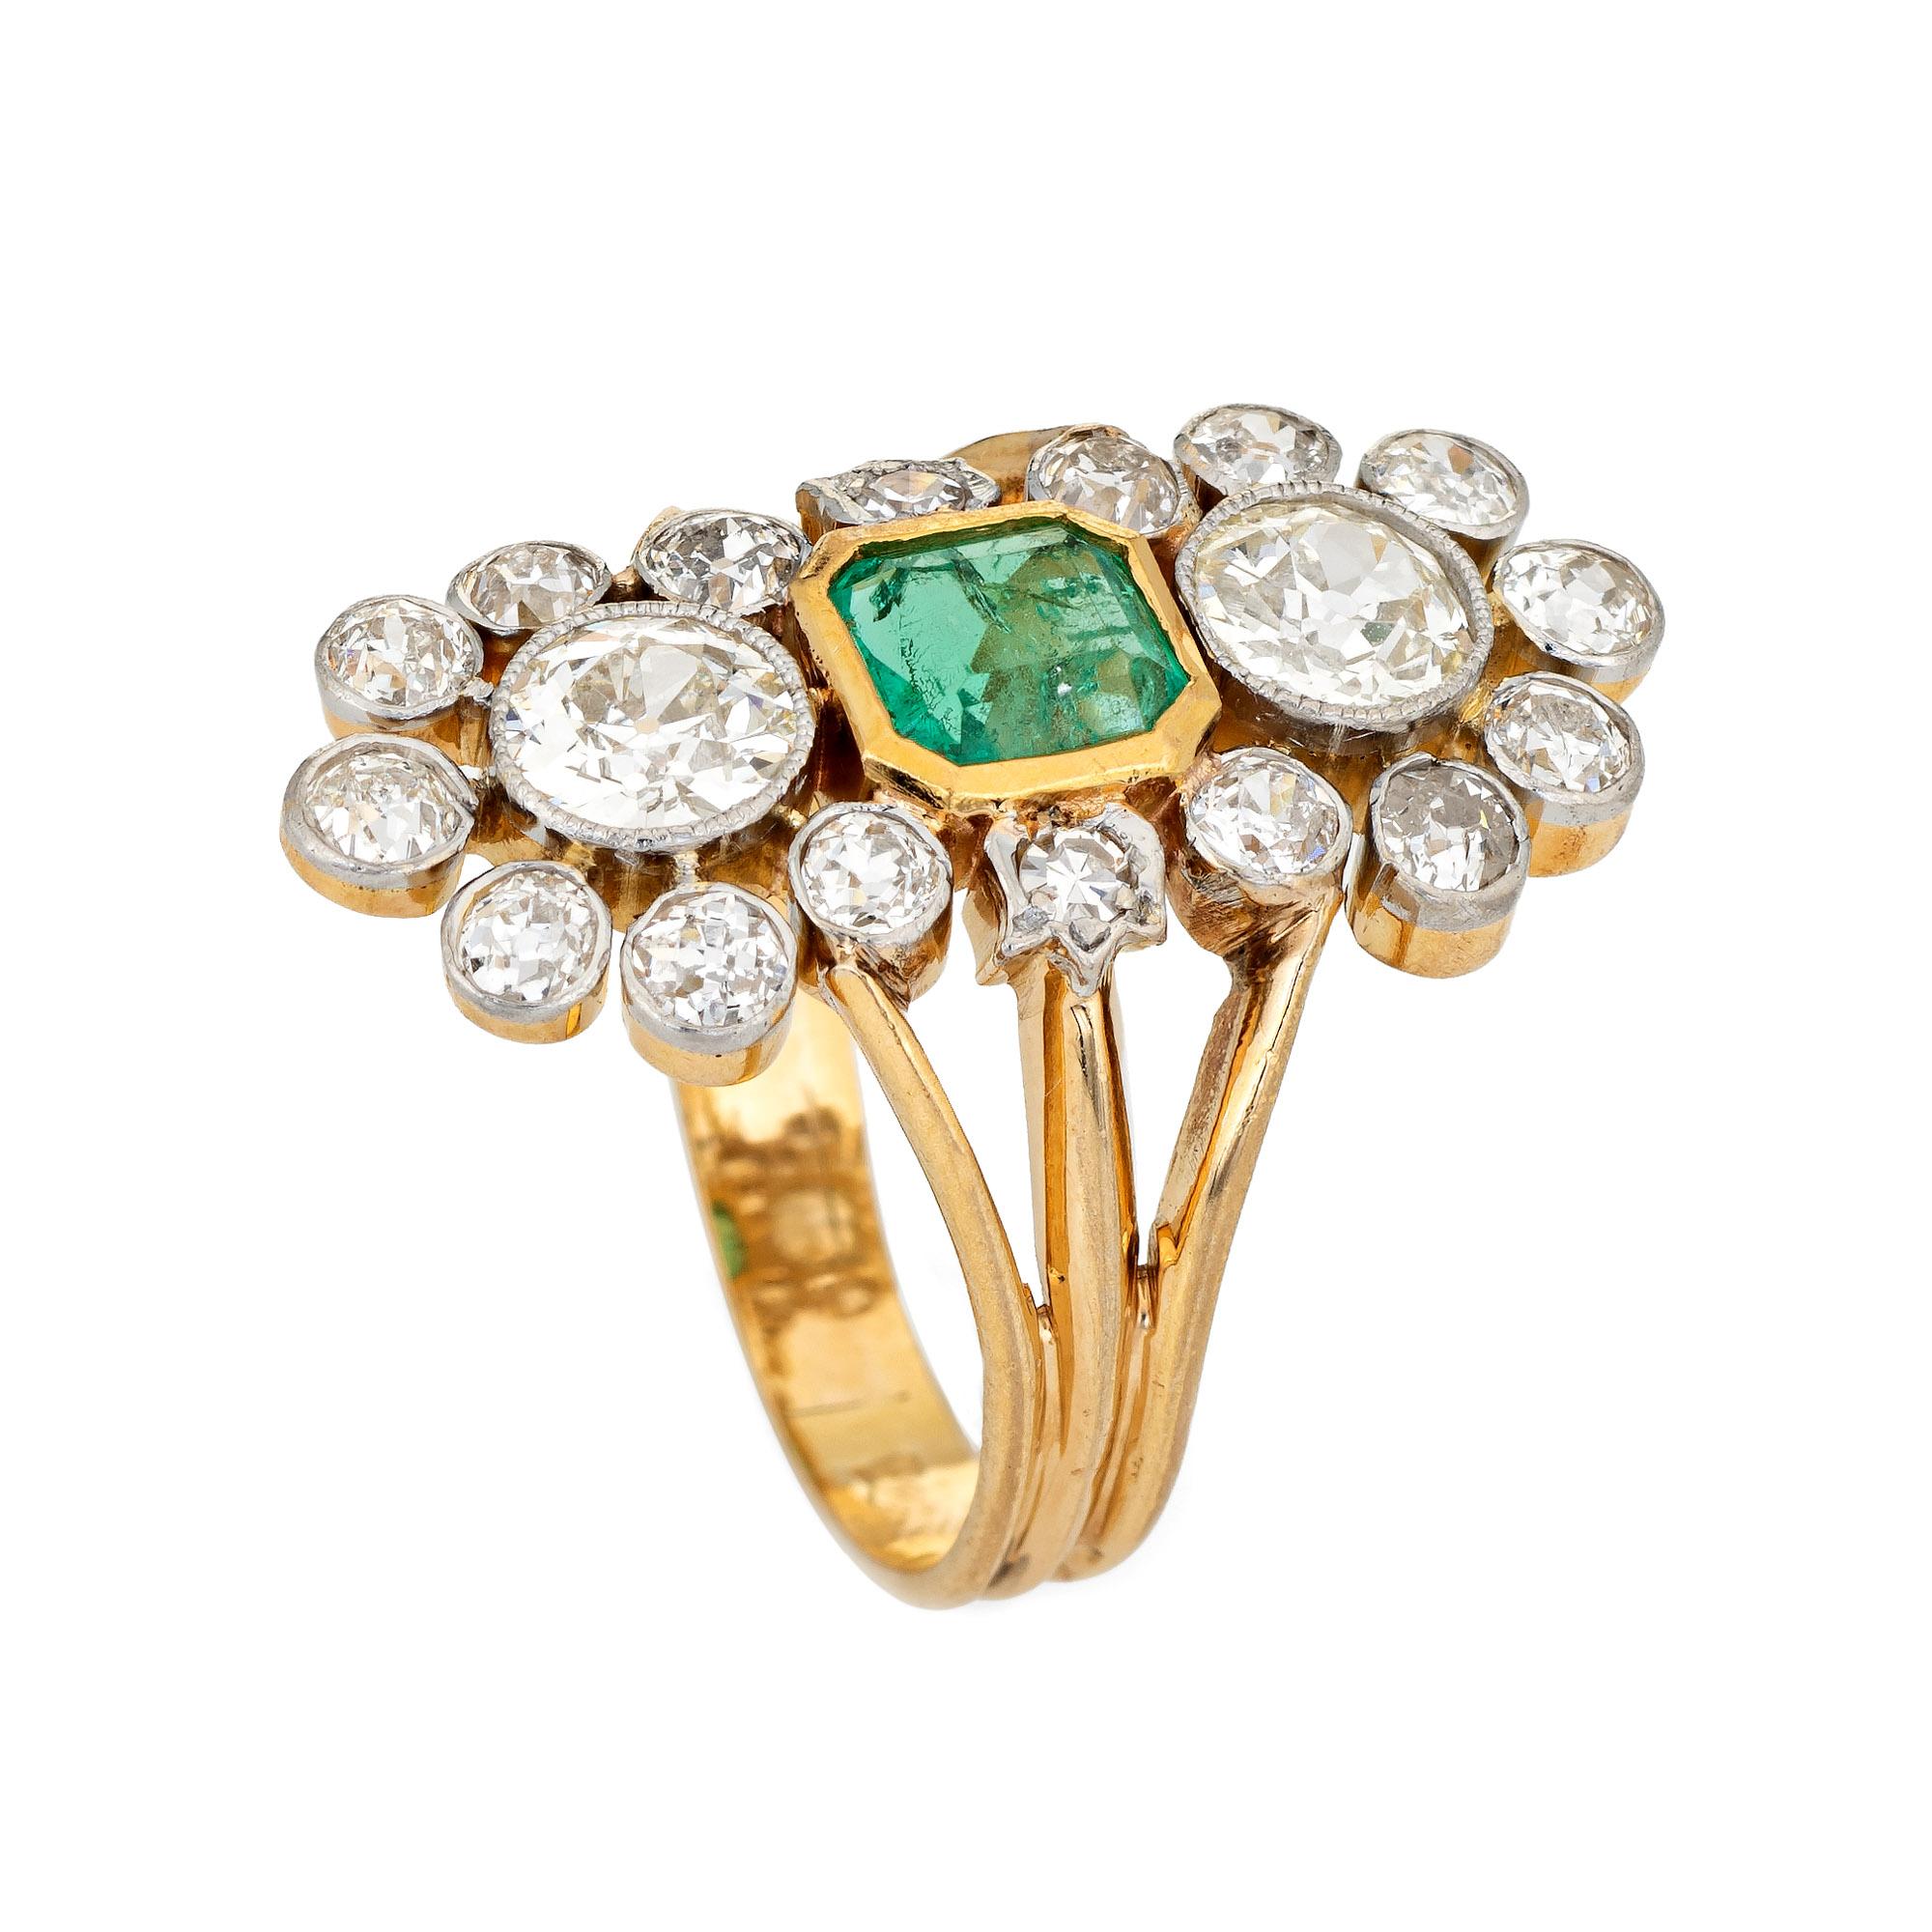 Stylish and finely detailed vintage early Art Deco diamond & emerald French import ring (circa 1910s to 1920s) crafted in platinum topped 18 karat yellow gold. 

The larger two old European cut diamonds are estimated at 0.55 carats each, flanked